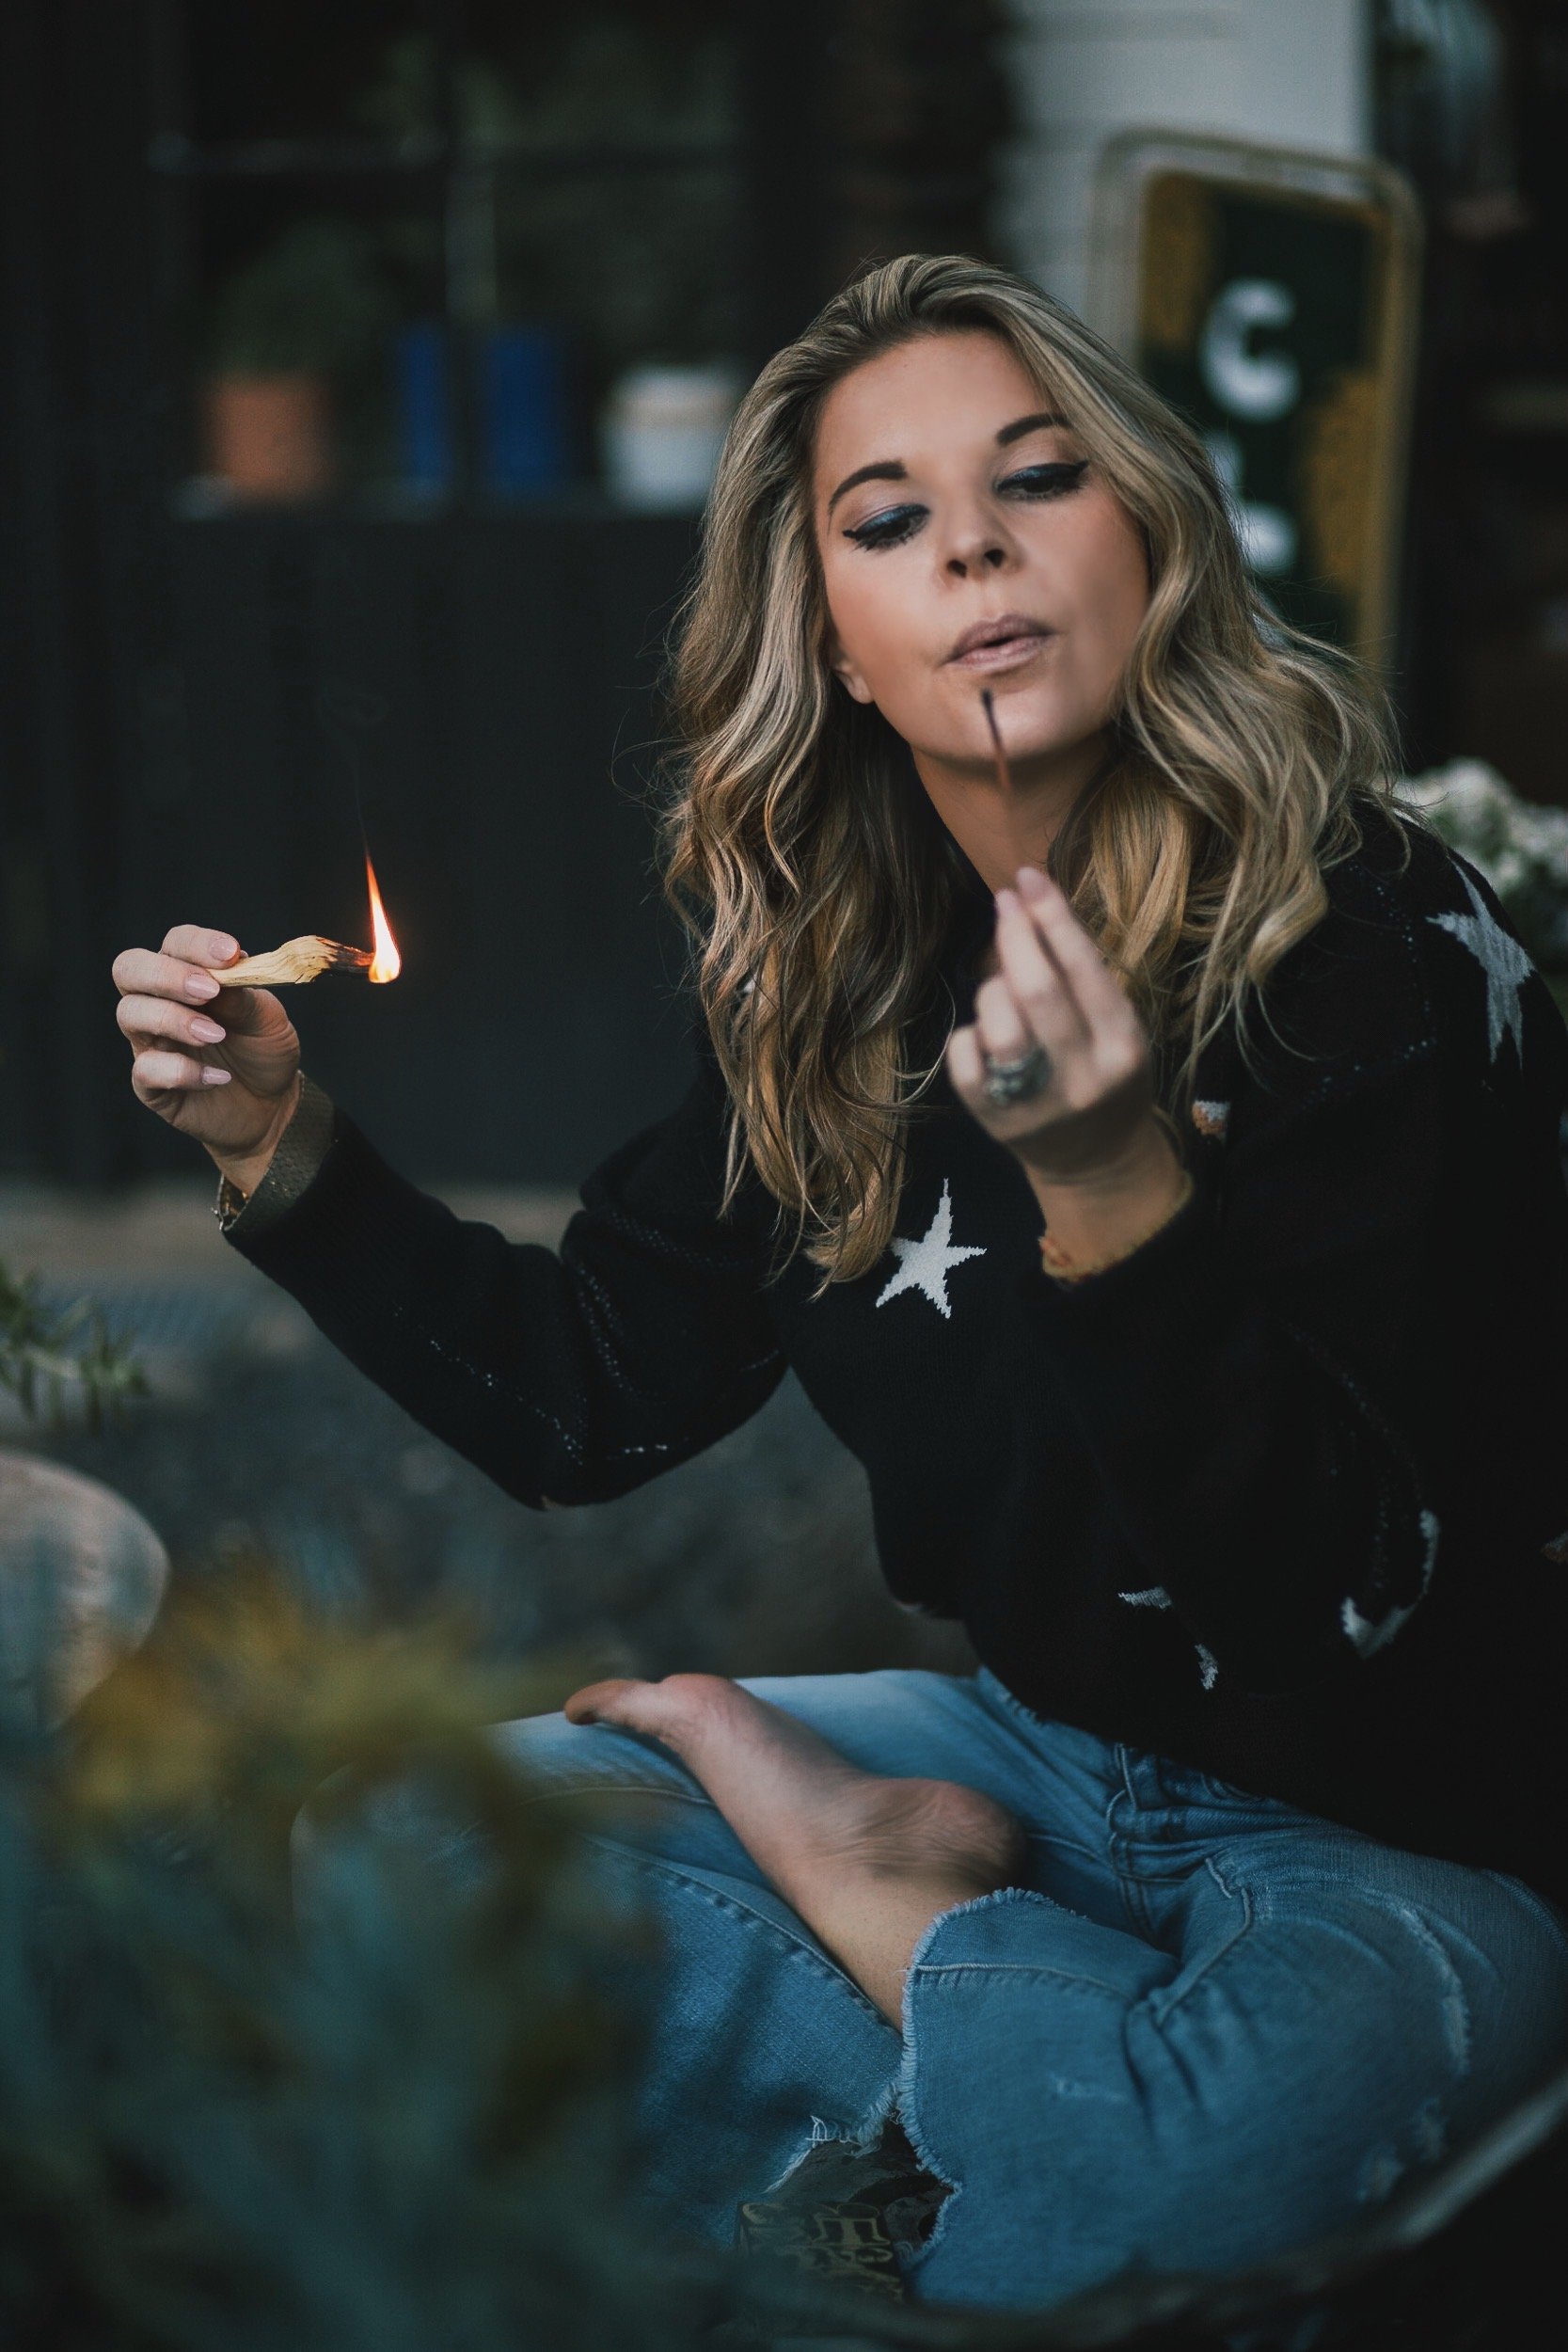 a woman sitting in the grass blowing out a match she used to light some palo santo. she has blonde hair and a navy shirt with white stars. she teaches how the law of attraction works